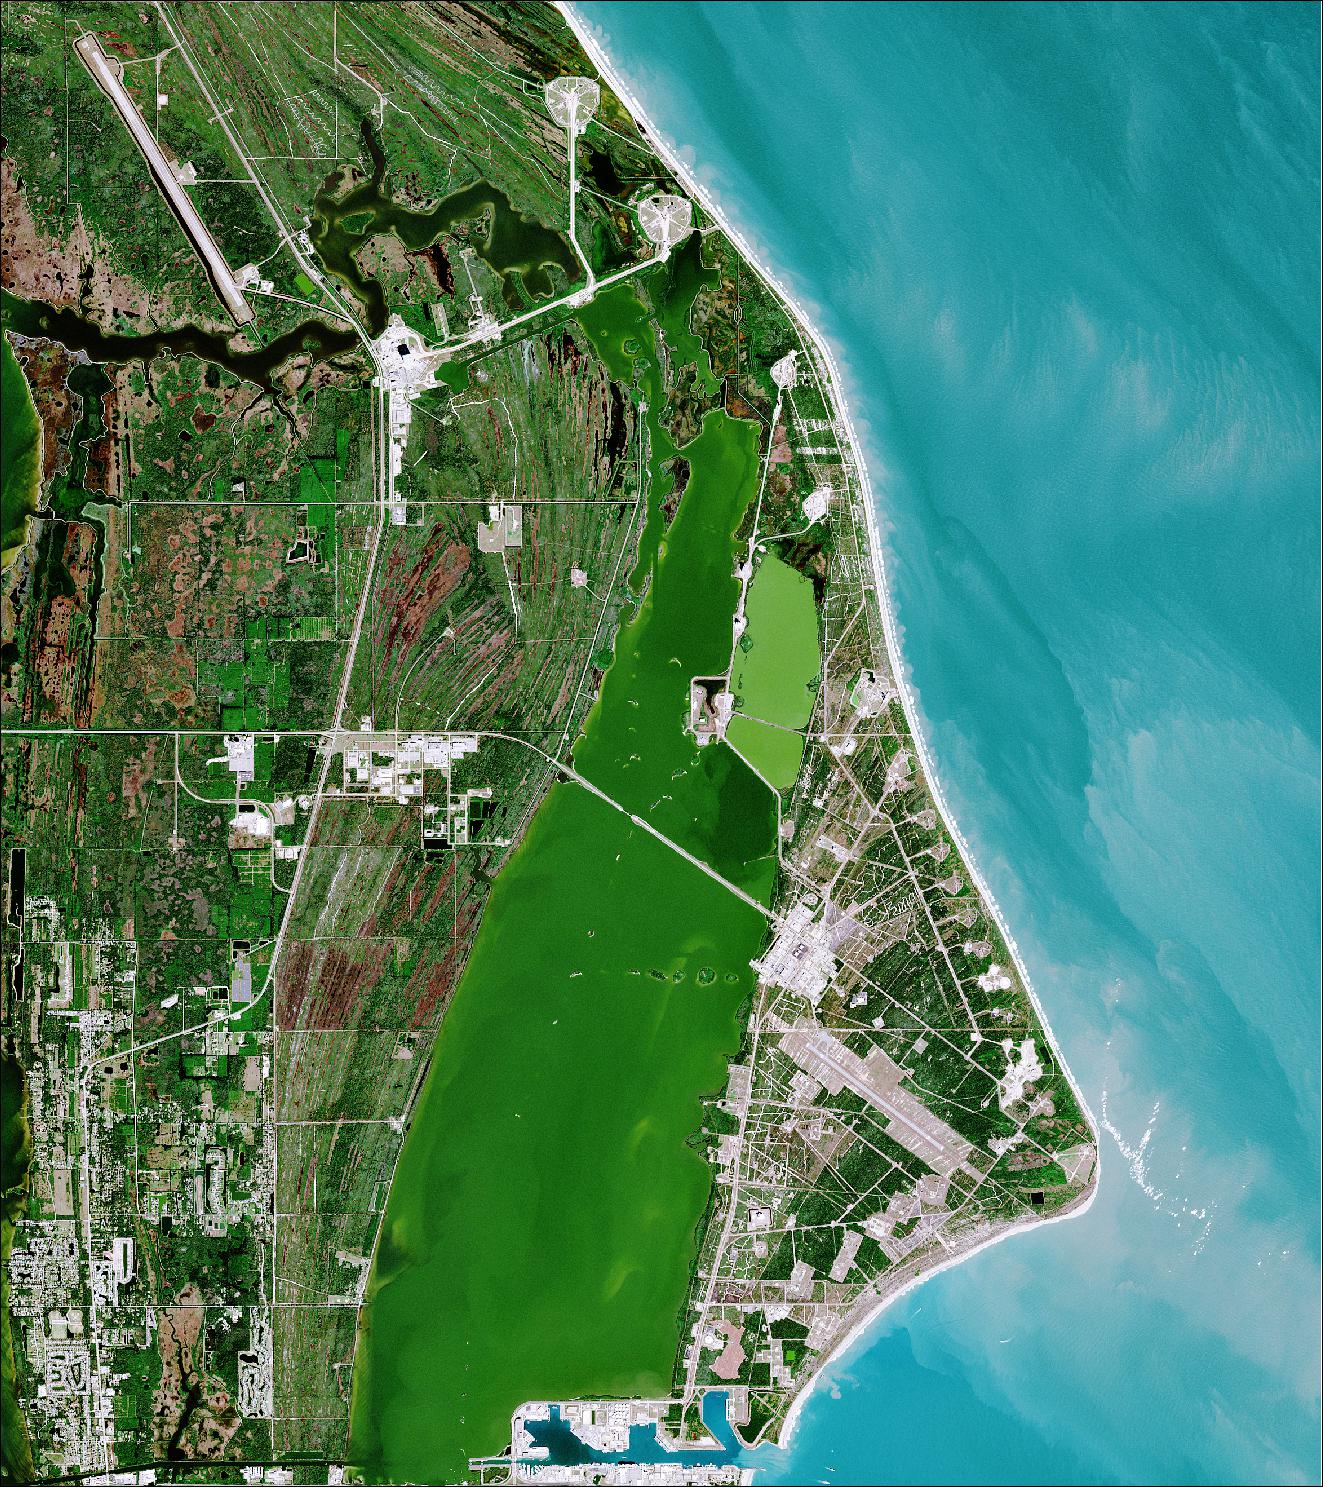 Figure 19: On 16 July 1969, the Saturn V rocket carrying Apollo 11 began its momentous voyage to the Moon. It lifted off from launch pad 39A – which can be seen in this Copernicus Sentinel-2 image from 29 January 2019. Launch pad 39A is the second pad down from the top (the launch pad at the far top is 39B), image credit: ESA, the image contains modified Copernicus Sentinel data (2019), processed by ESA, CC BY-SA 3.0 IGO